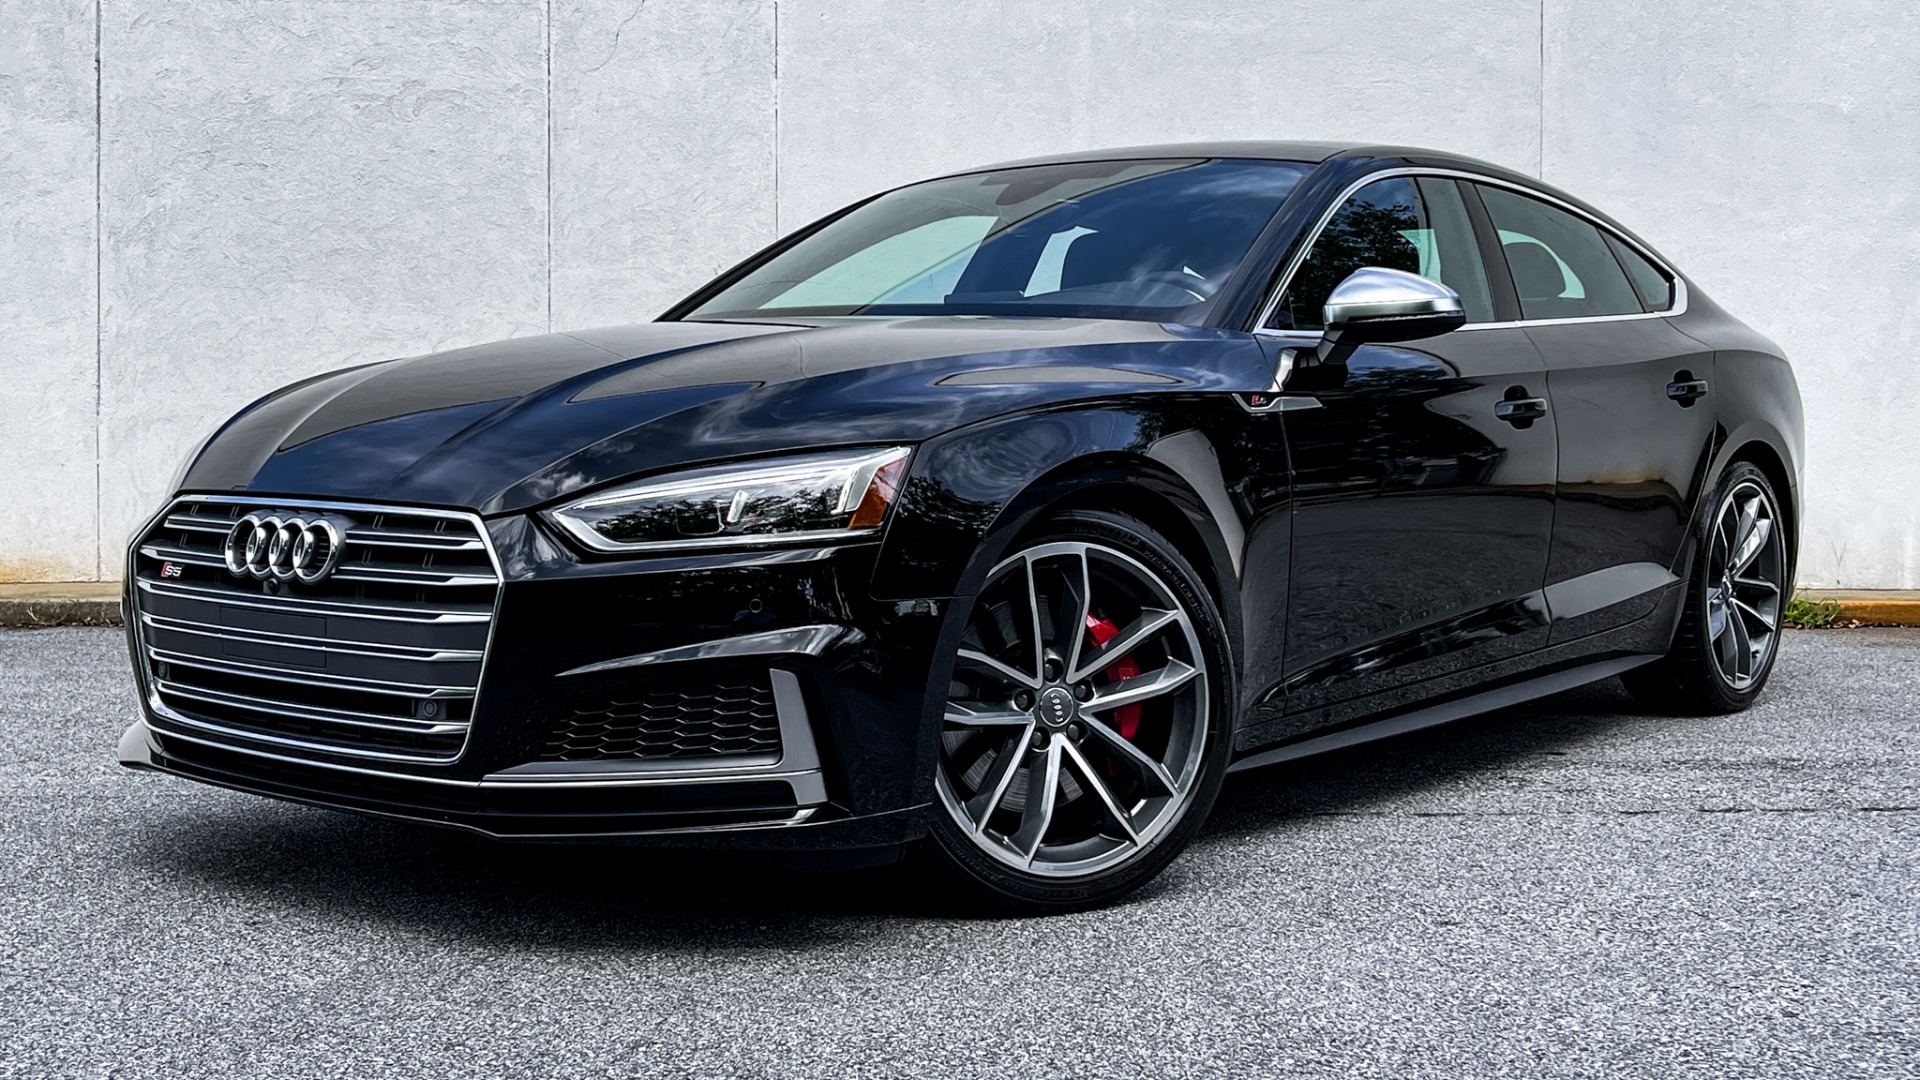 Used 2018 Audi S5 Sportback PRESTIGE / WARM WEATHER / S SPORT / 19IN WHEELS for sale Sold at Formula Imports in Charlotte NC 28227 1